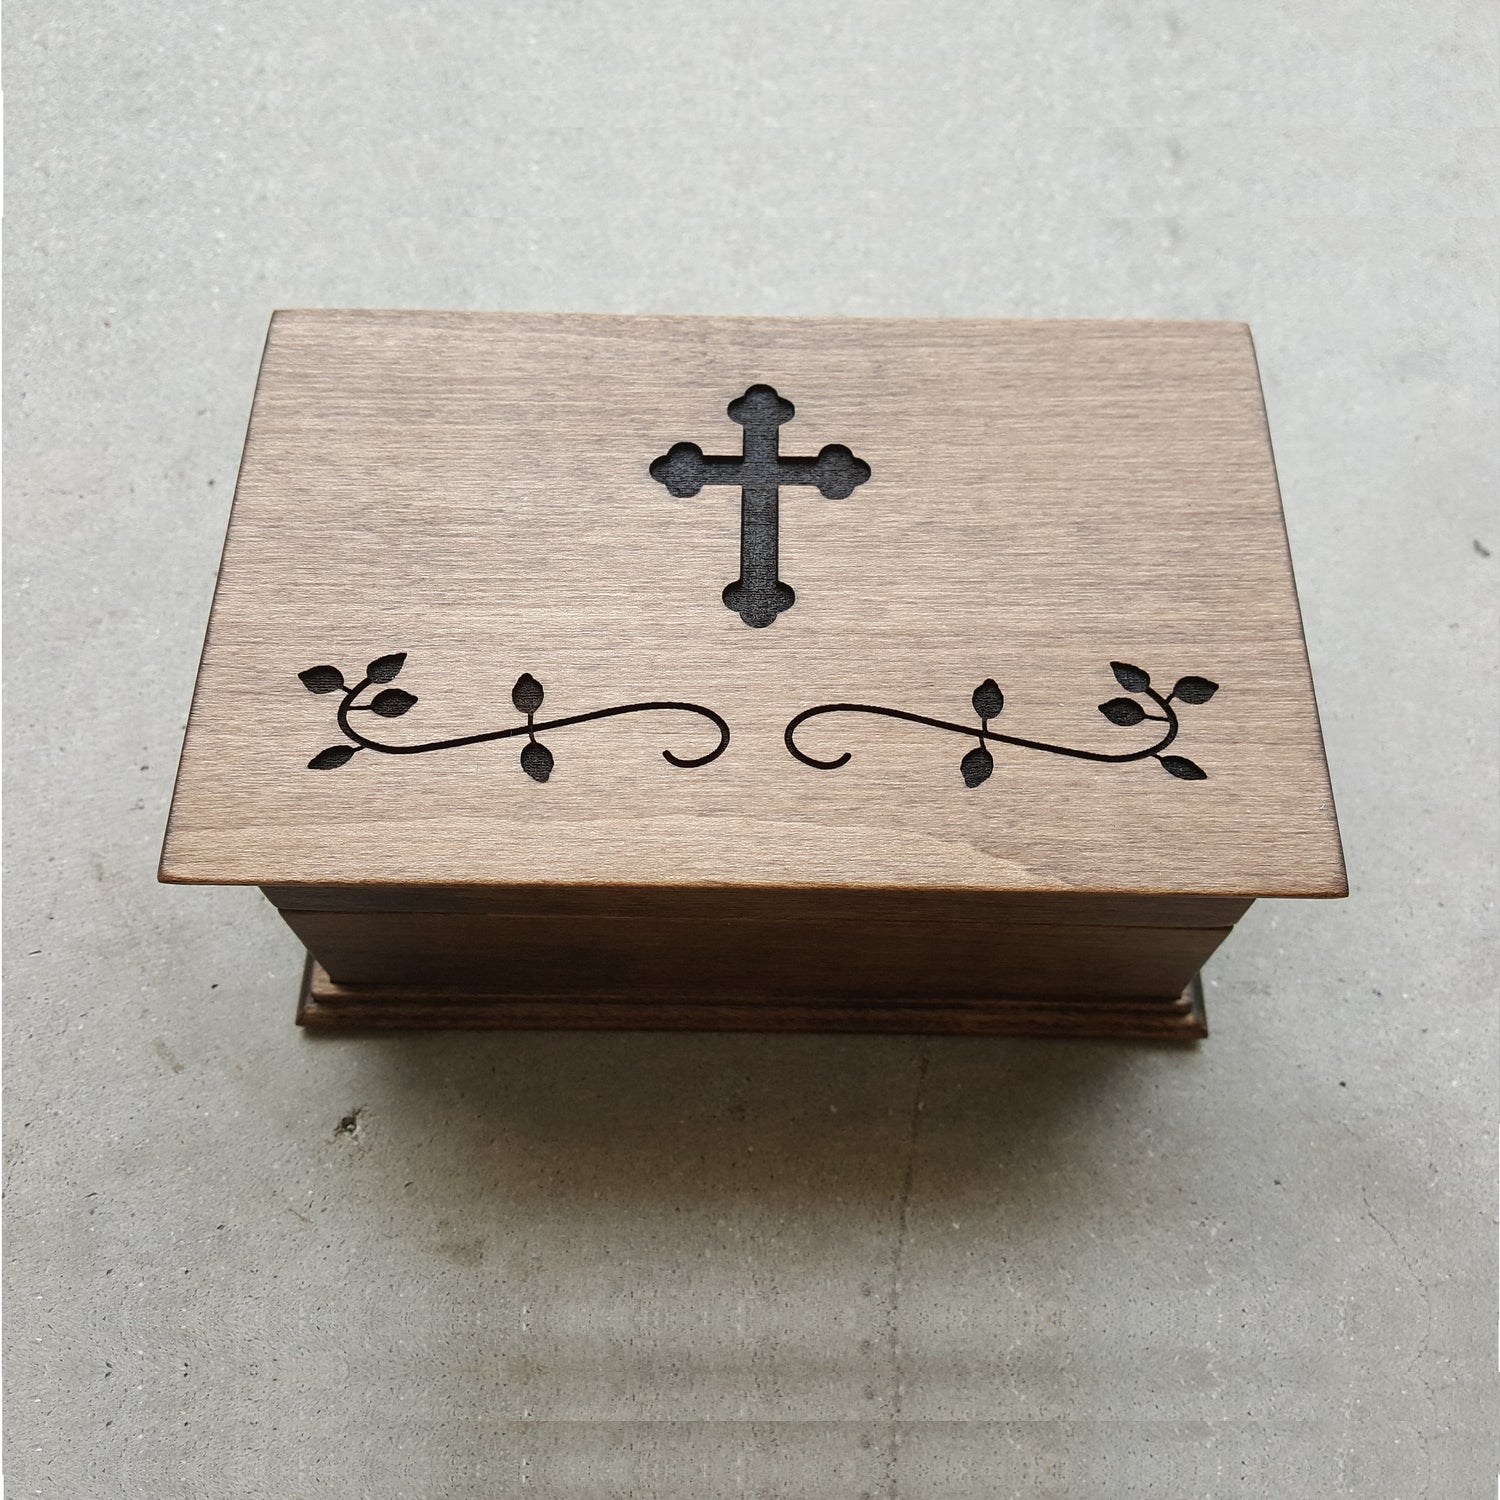 Baptism Keepsake Box with cross engraving on the top, choose color and song, personalize